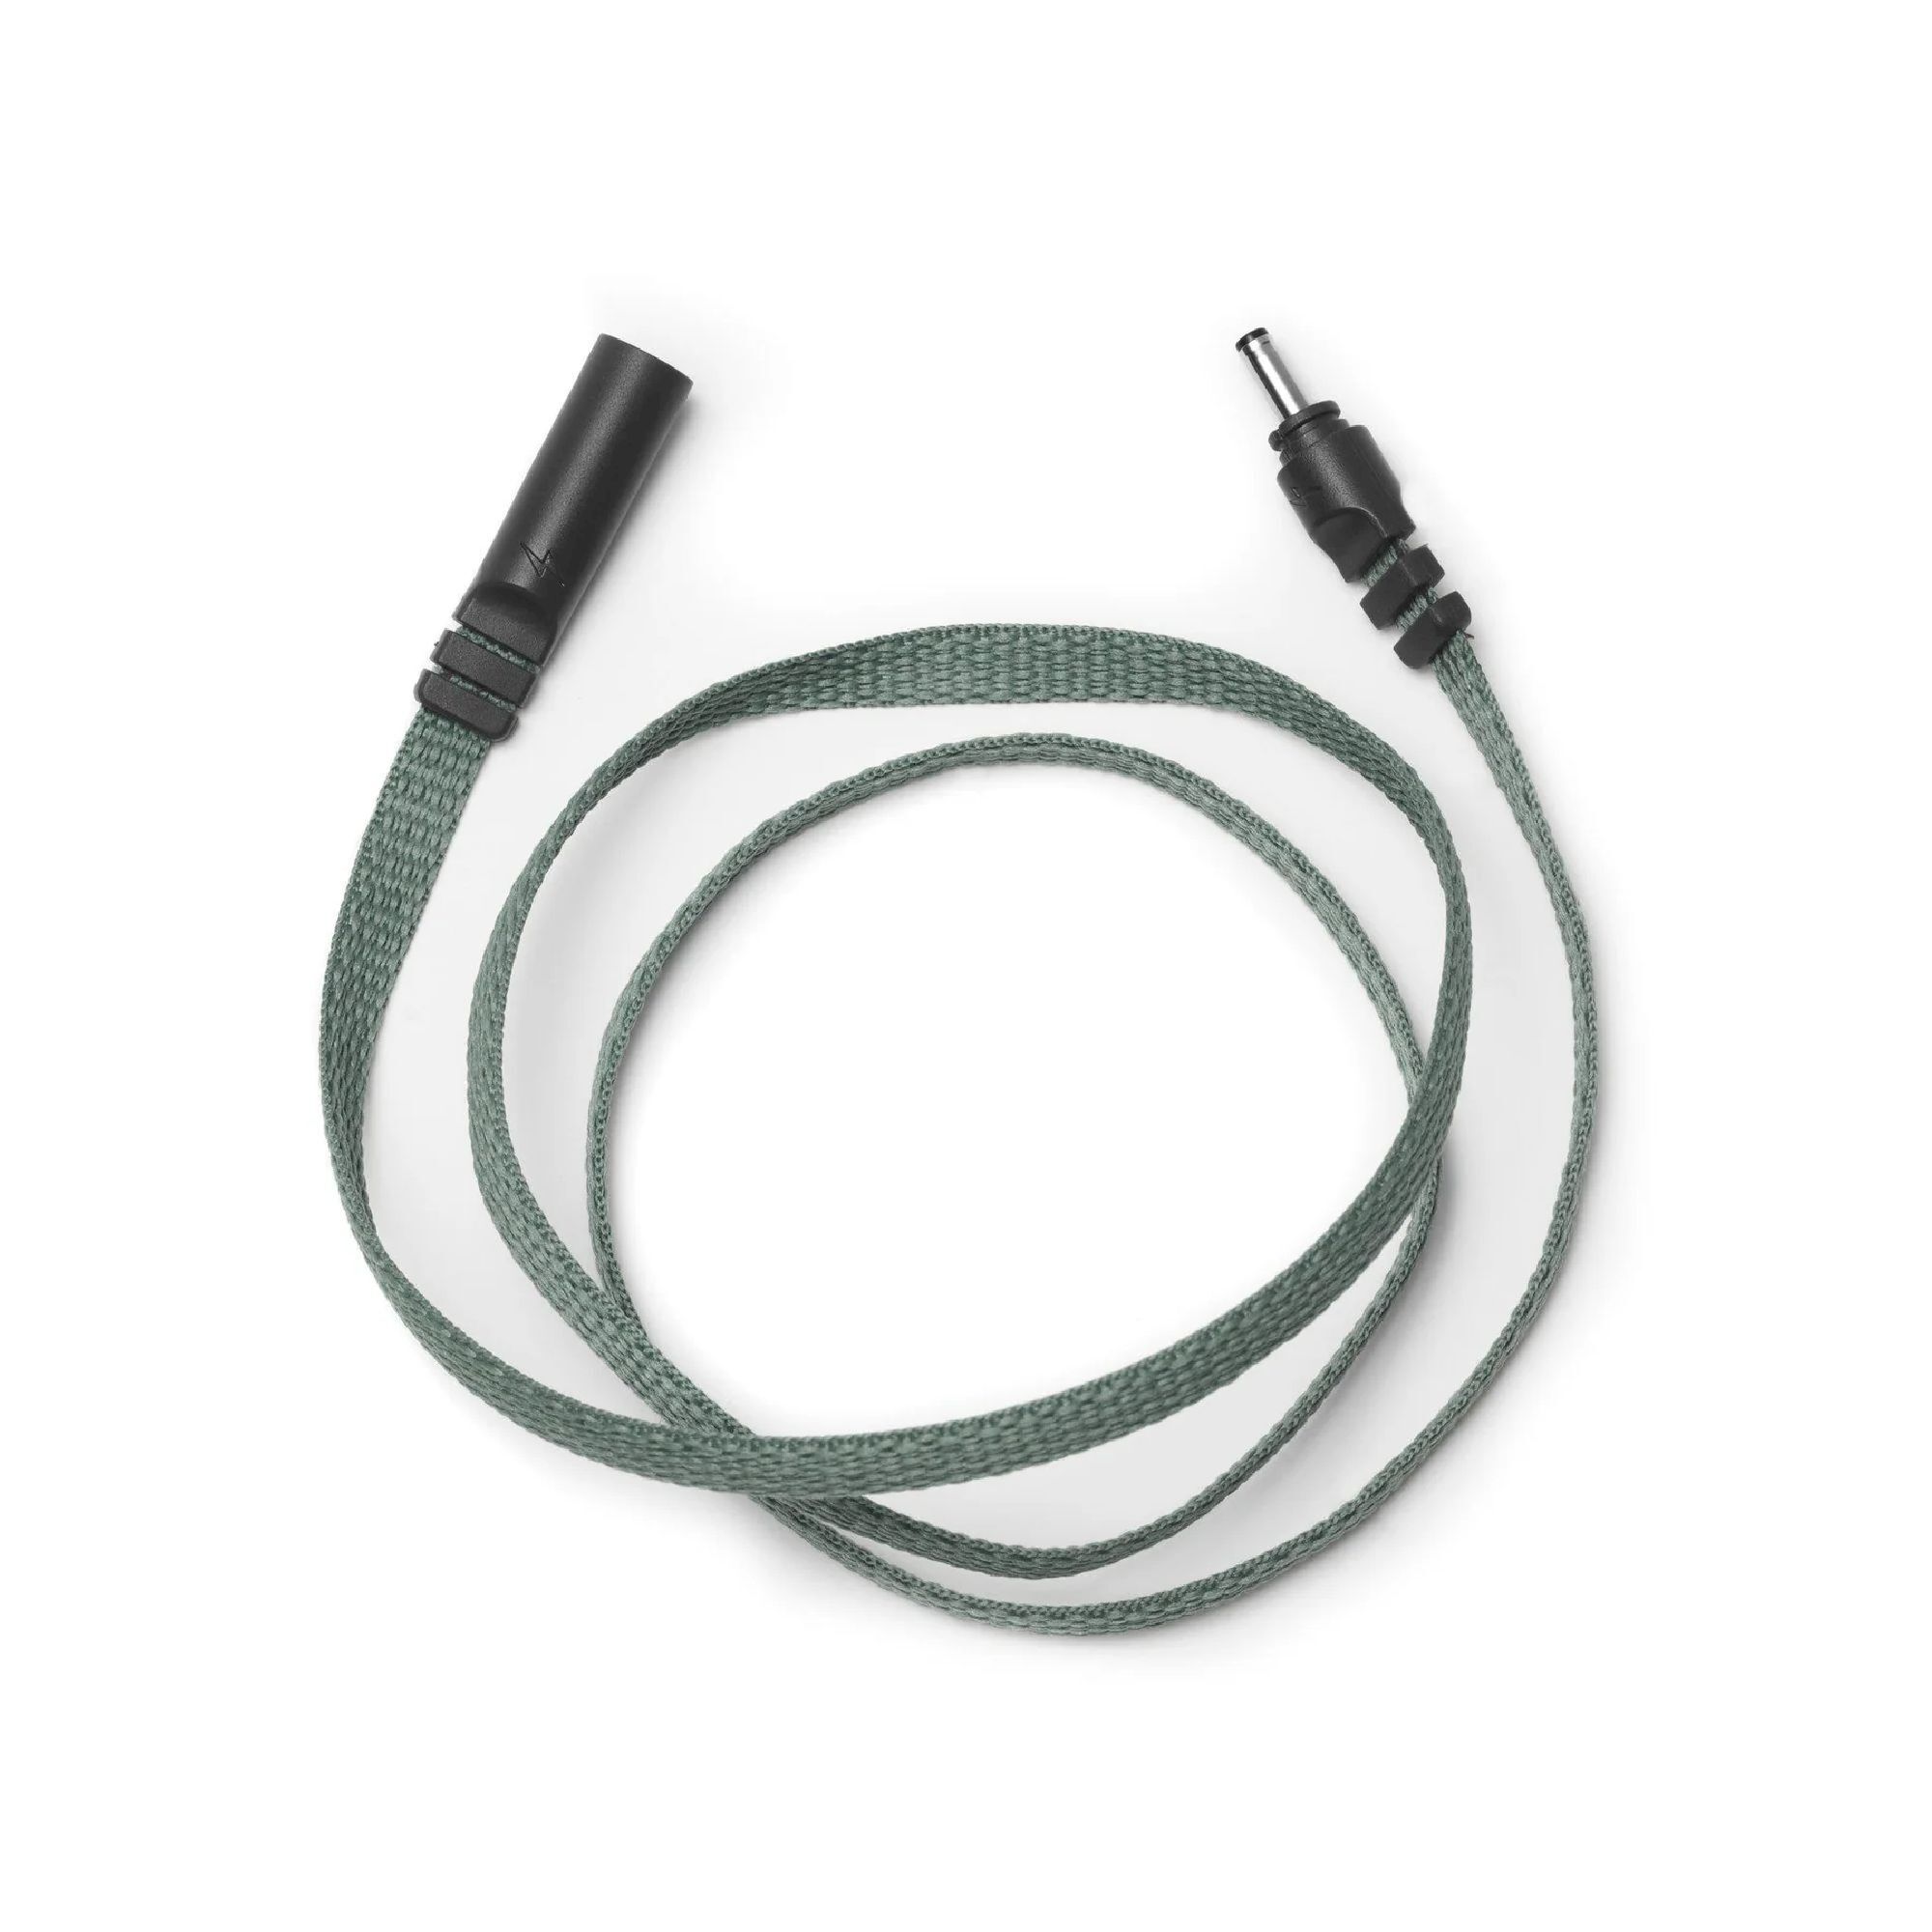 Silva Trail Runner Free 2 Extension Cable - Stirnlampe | Hardloop